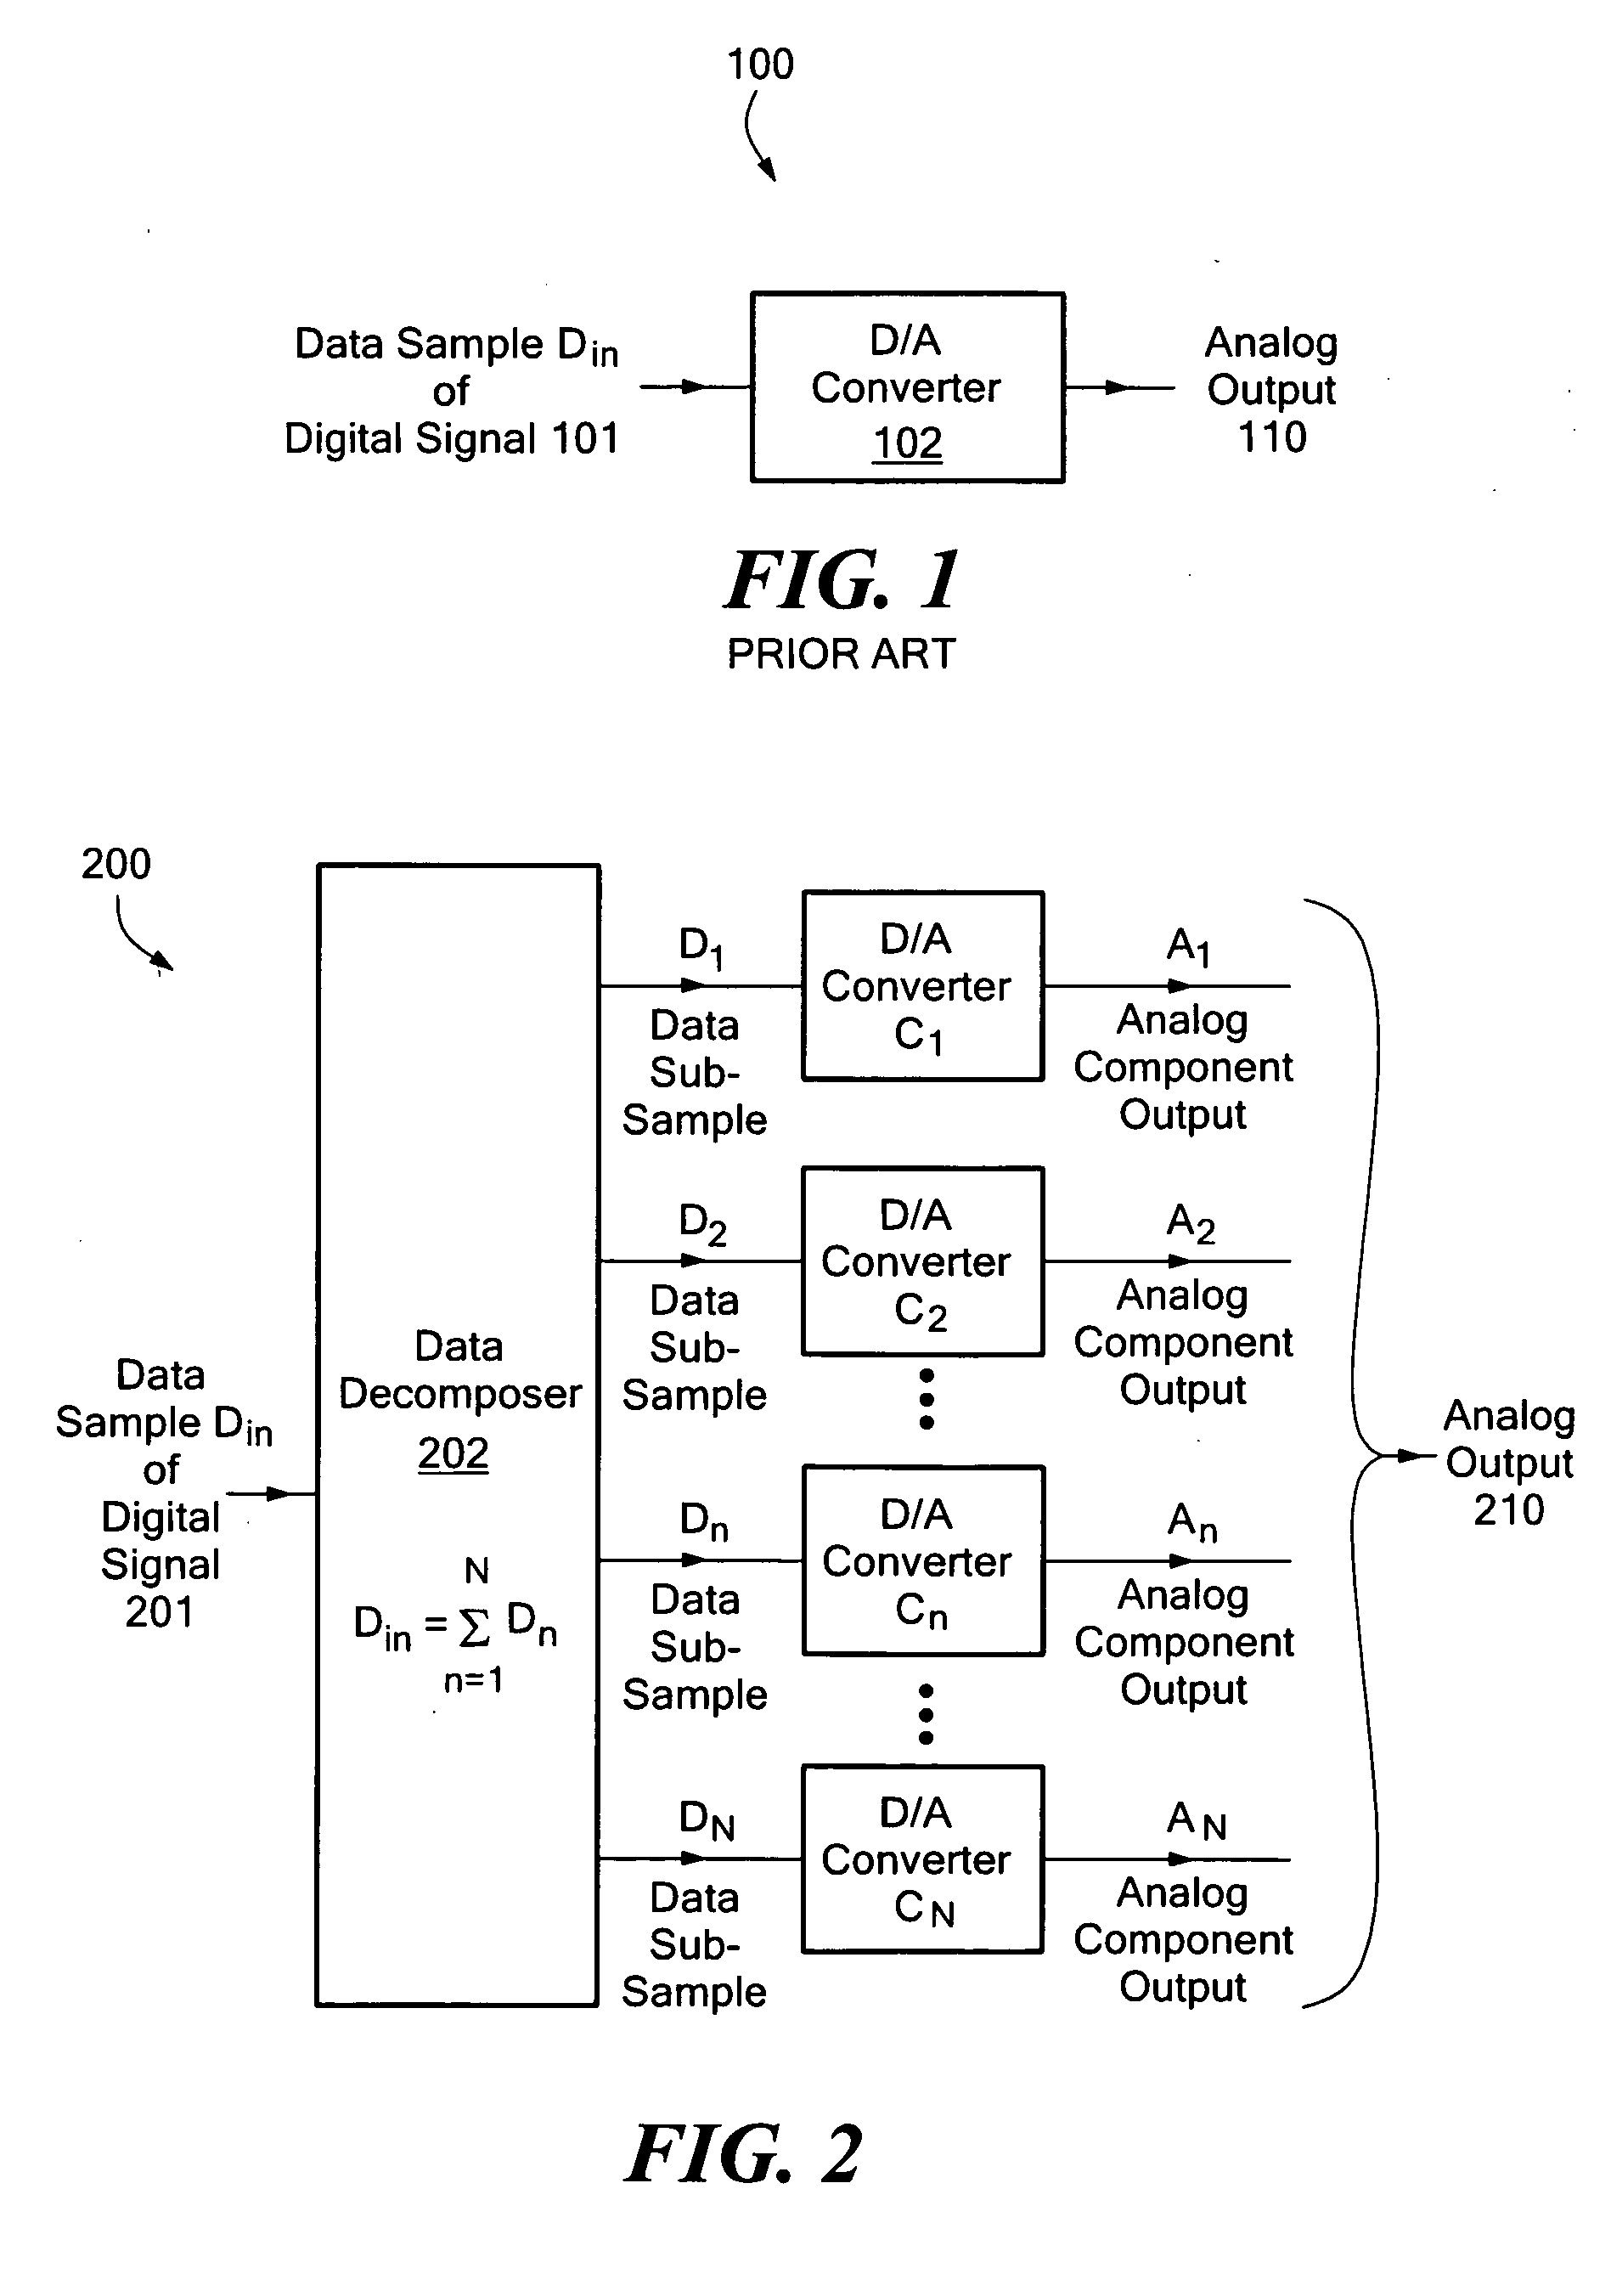 Multi-channel digital to analog (D/A) conversion